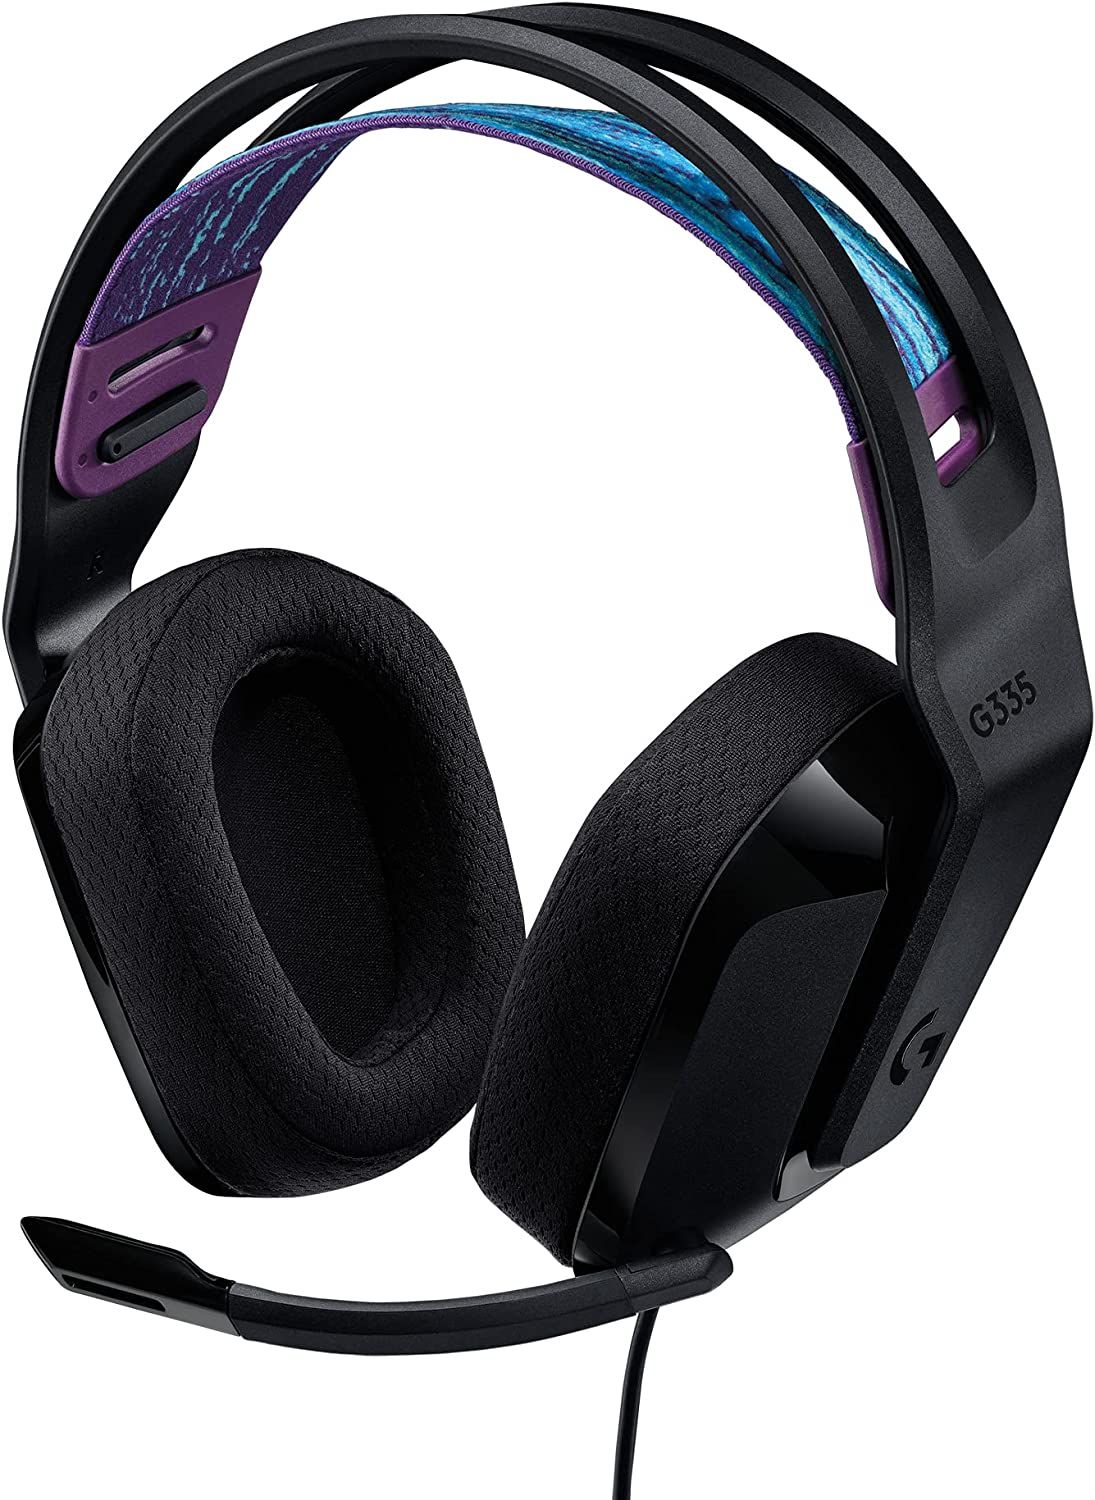 logitech 6335 wired gaming headset